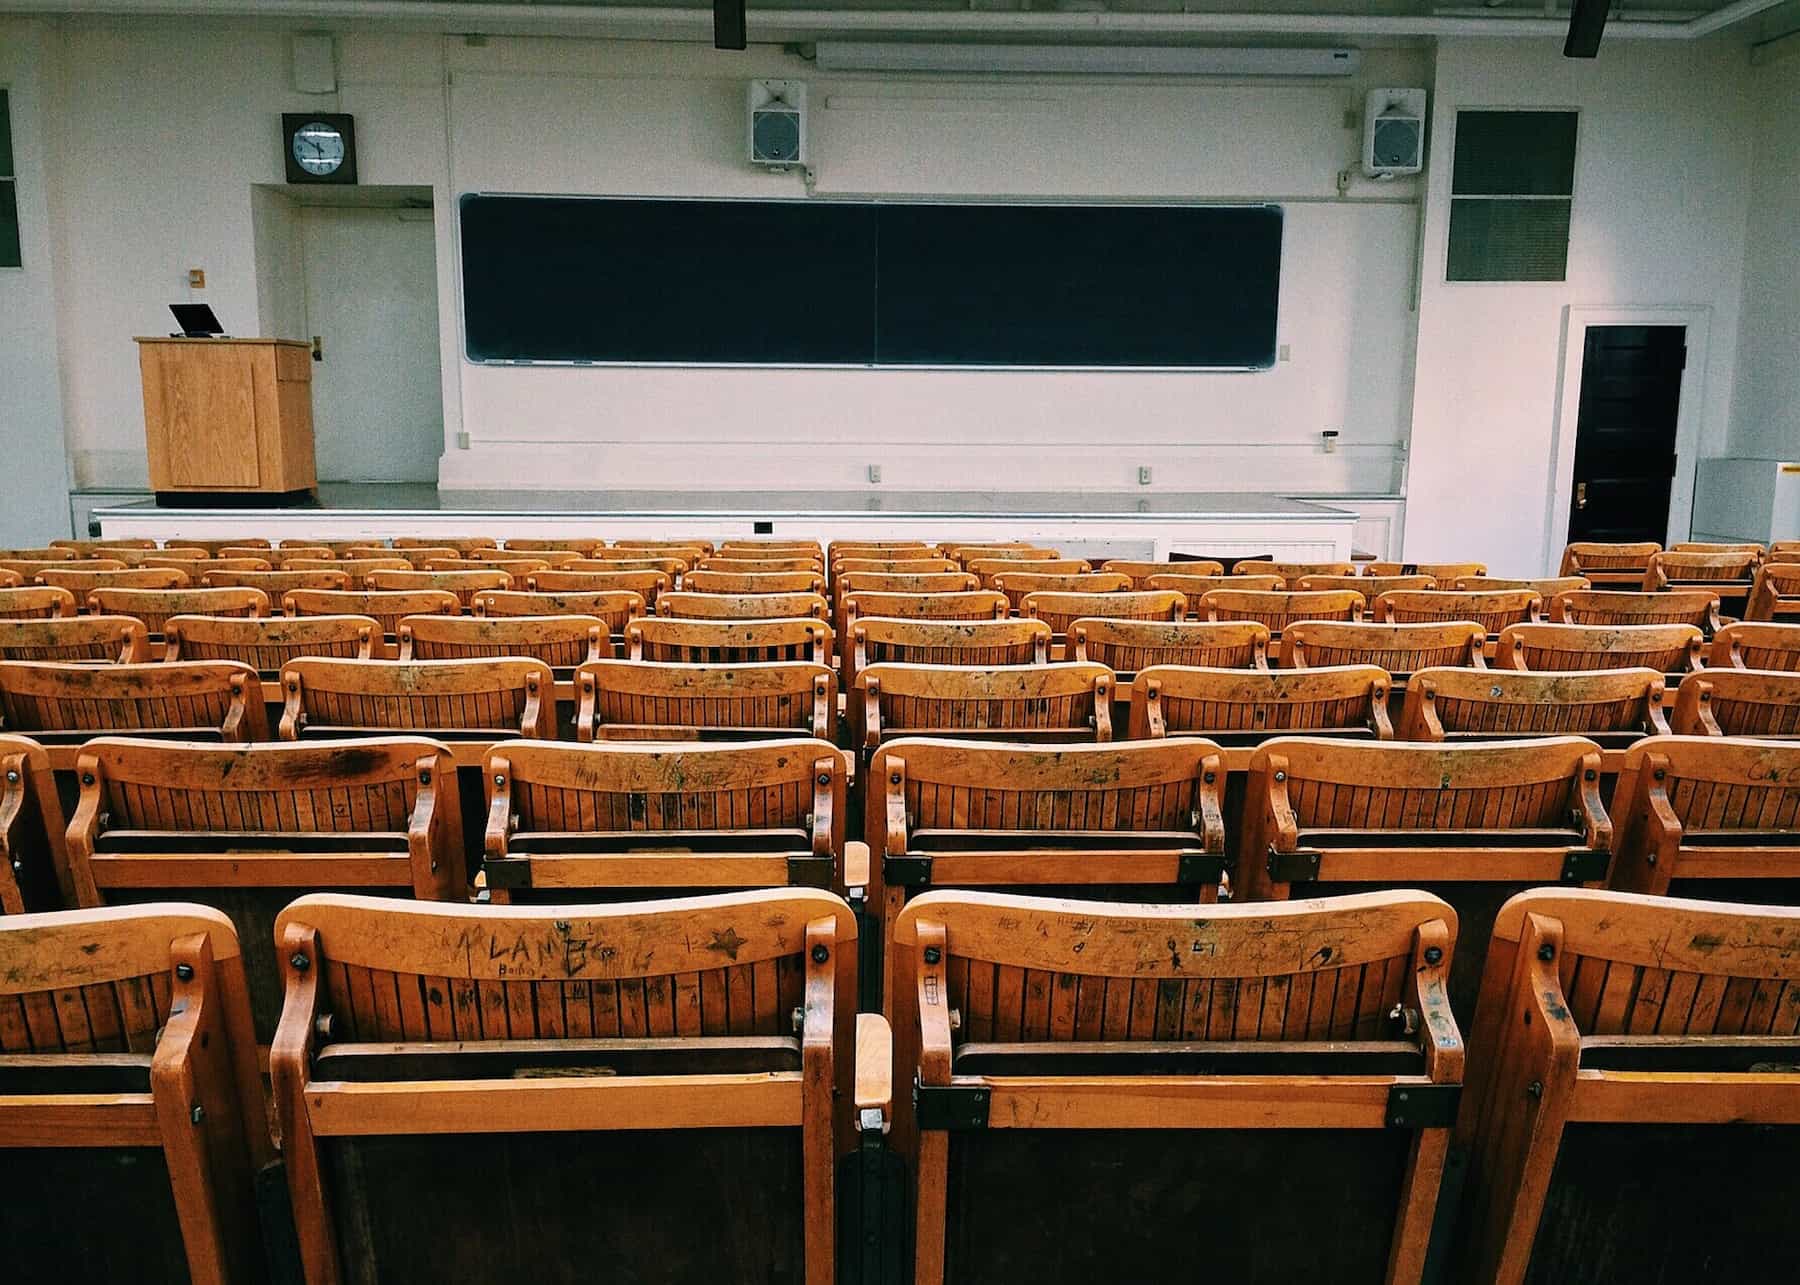 Rows of chairs on an empty classroom